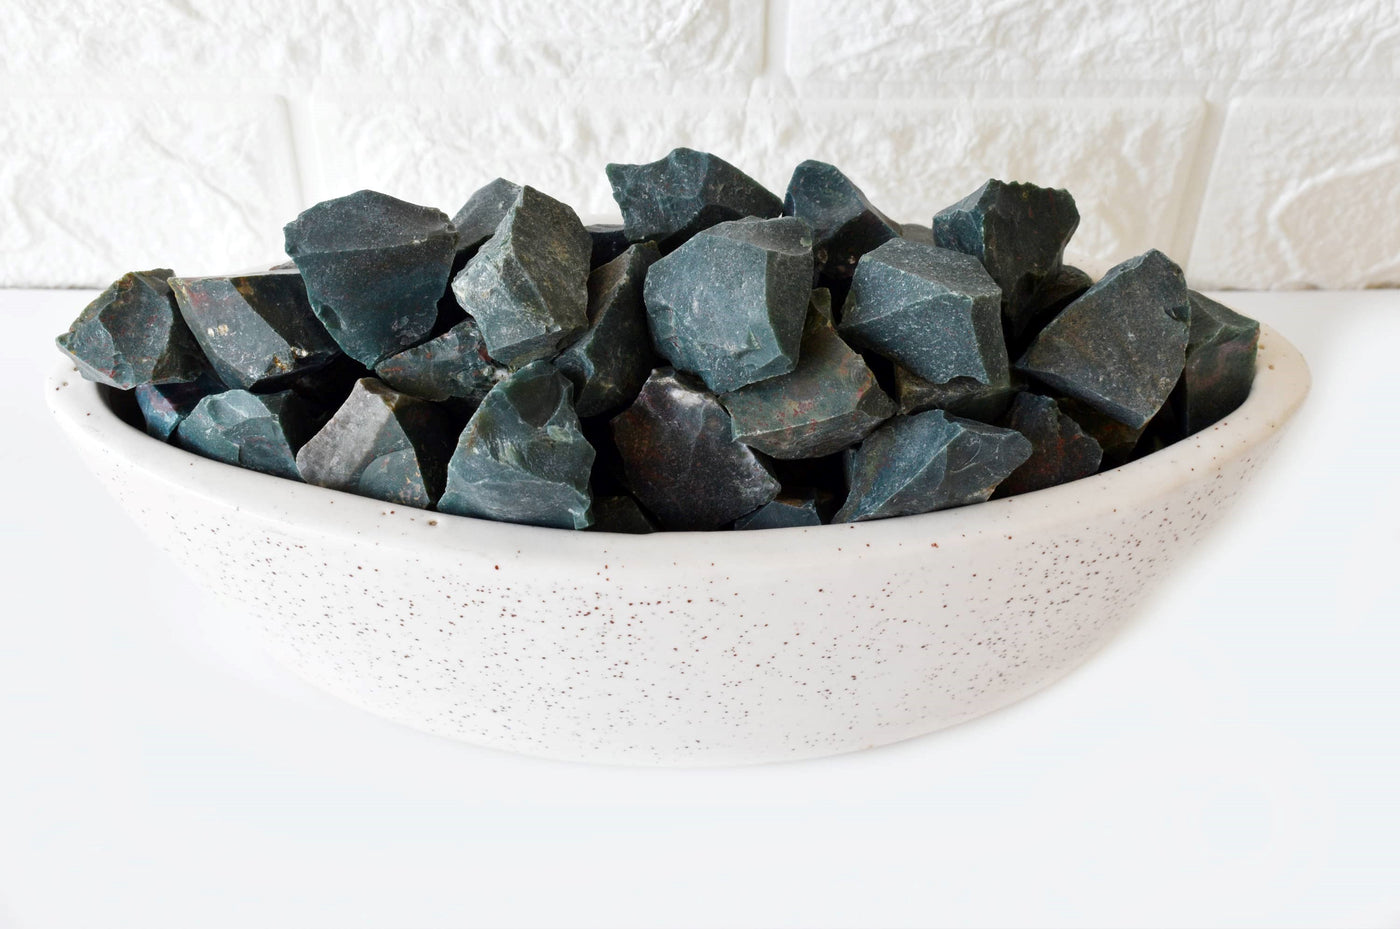 Bloodstone Rough Rocks (Grounding and Protecting)